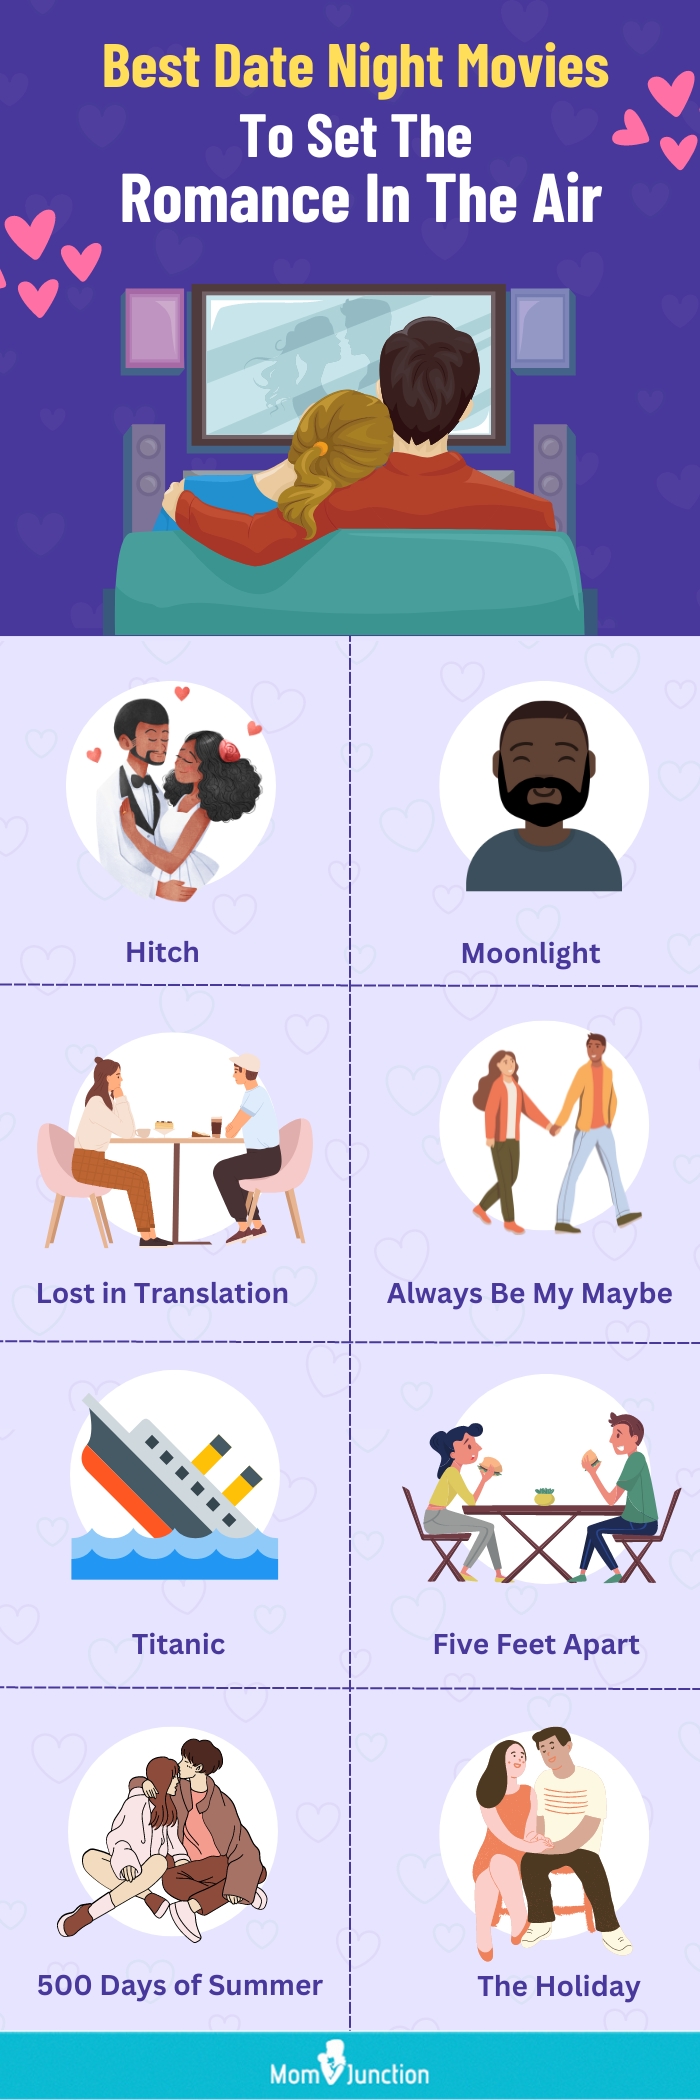 best date night movies to set the romance in the air (infographic)